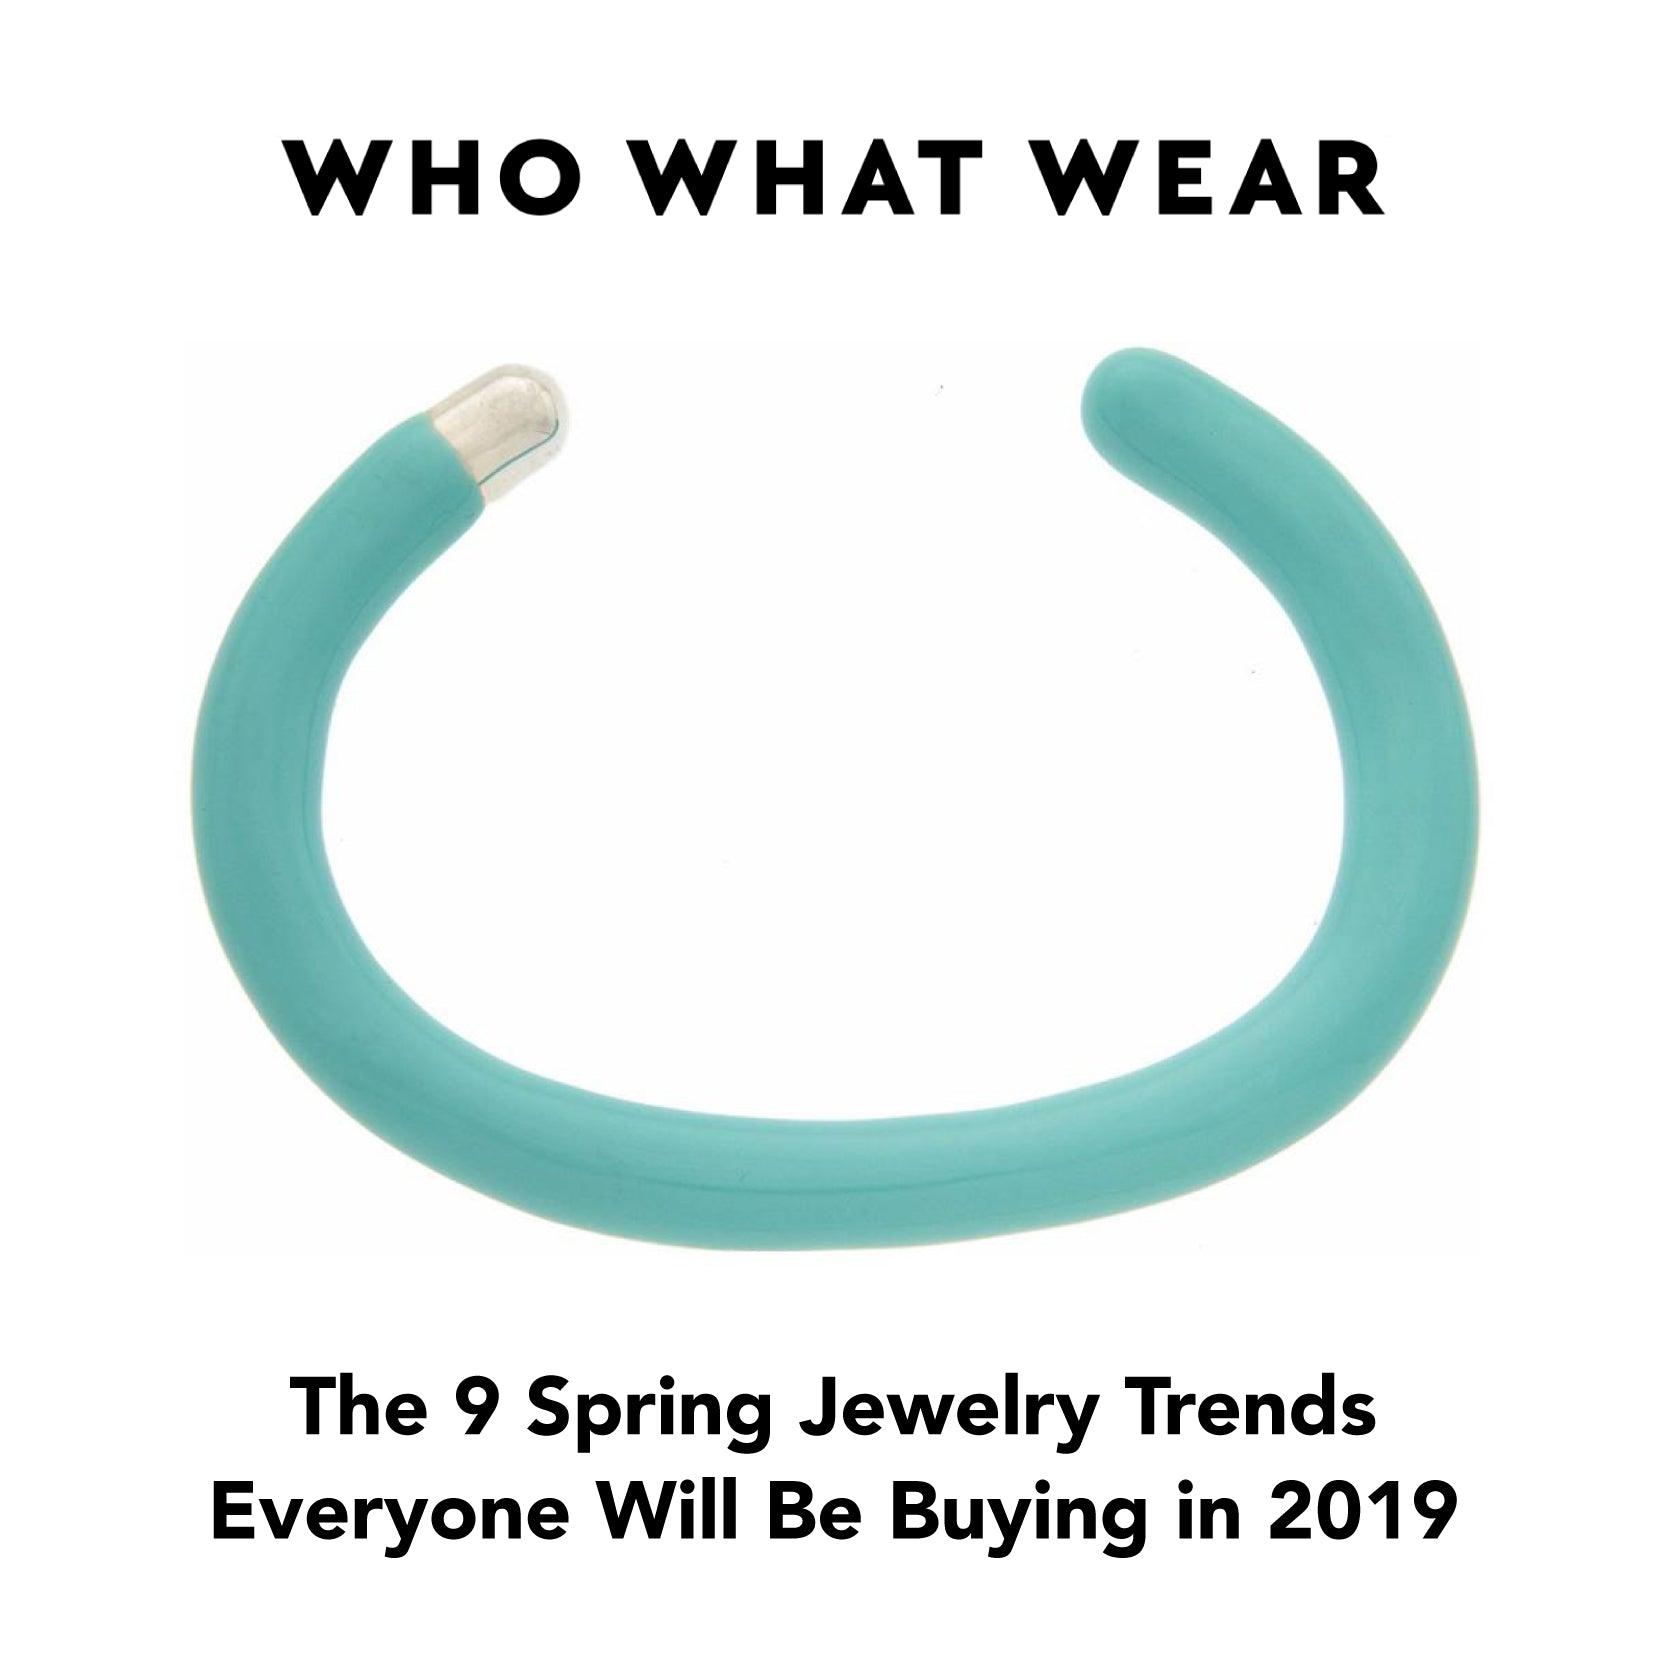 WhoWhatWear - The 9 Spring Jewelry Trends Everyone Will Be Buying in 2019